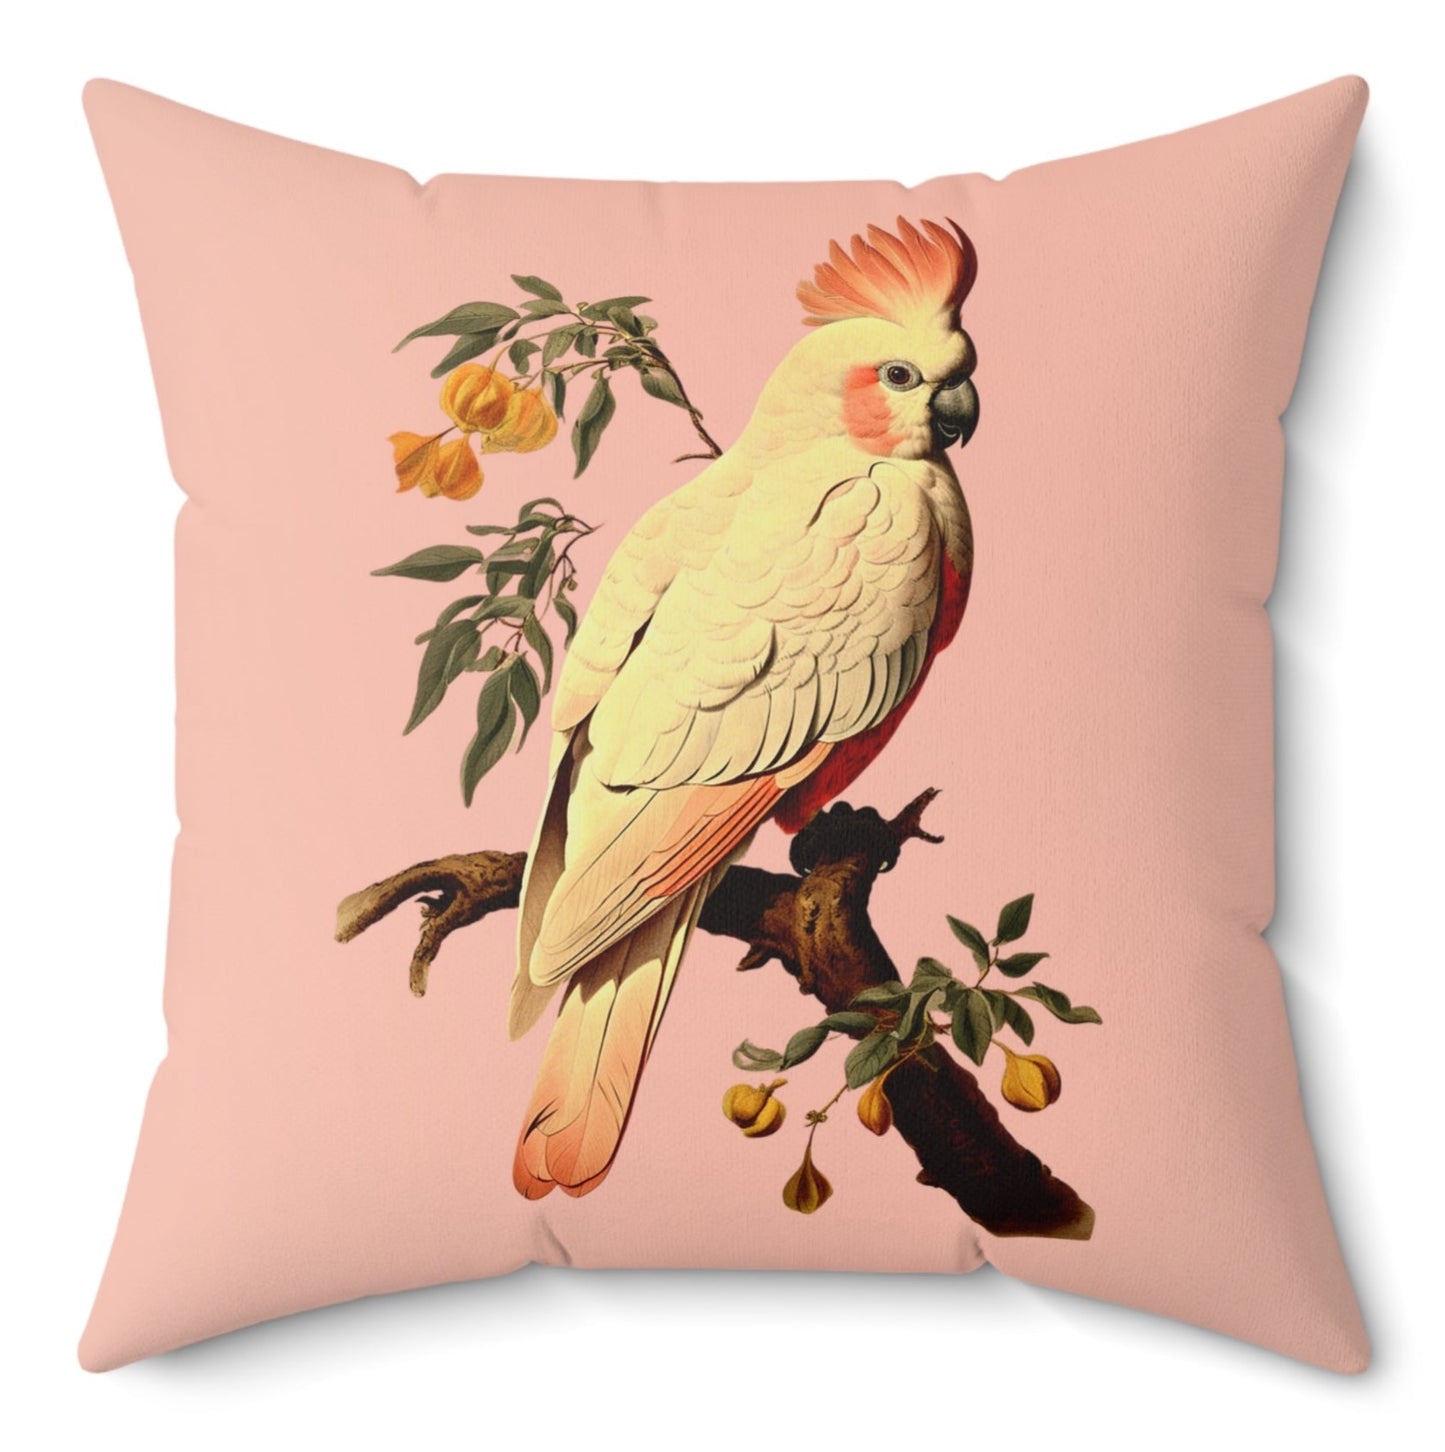 Purple Salmon Crested Cockatoo Maximalist Eclectic Throw Pillow Decorative Polyester Square Cover